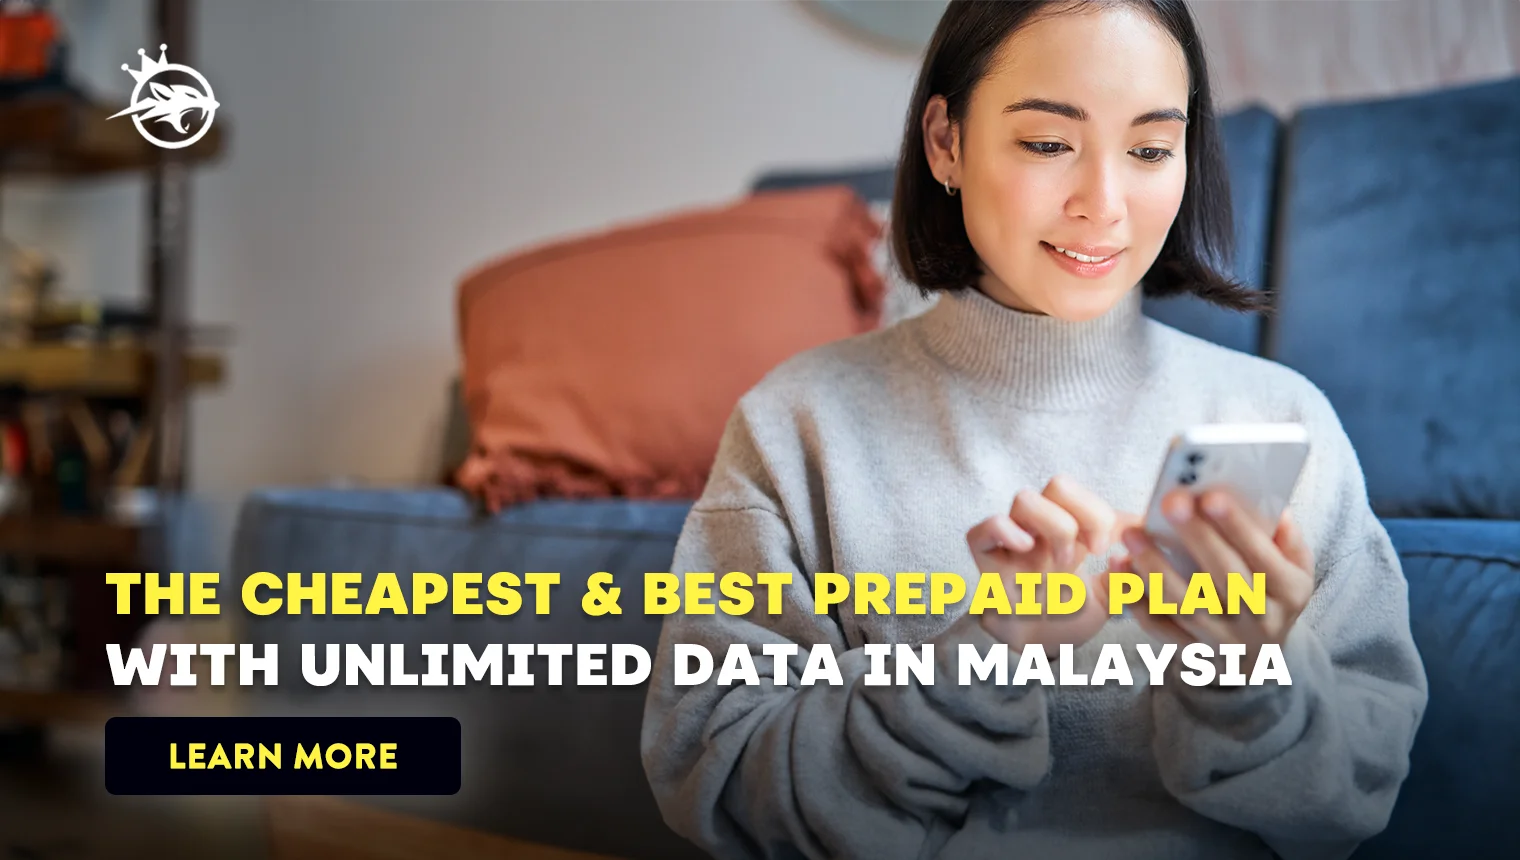 The Cheapest & Best Prepaid Plan with Unlimited Data in Malaysia